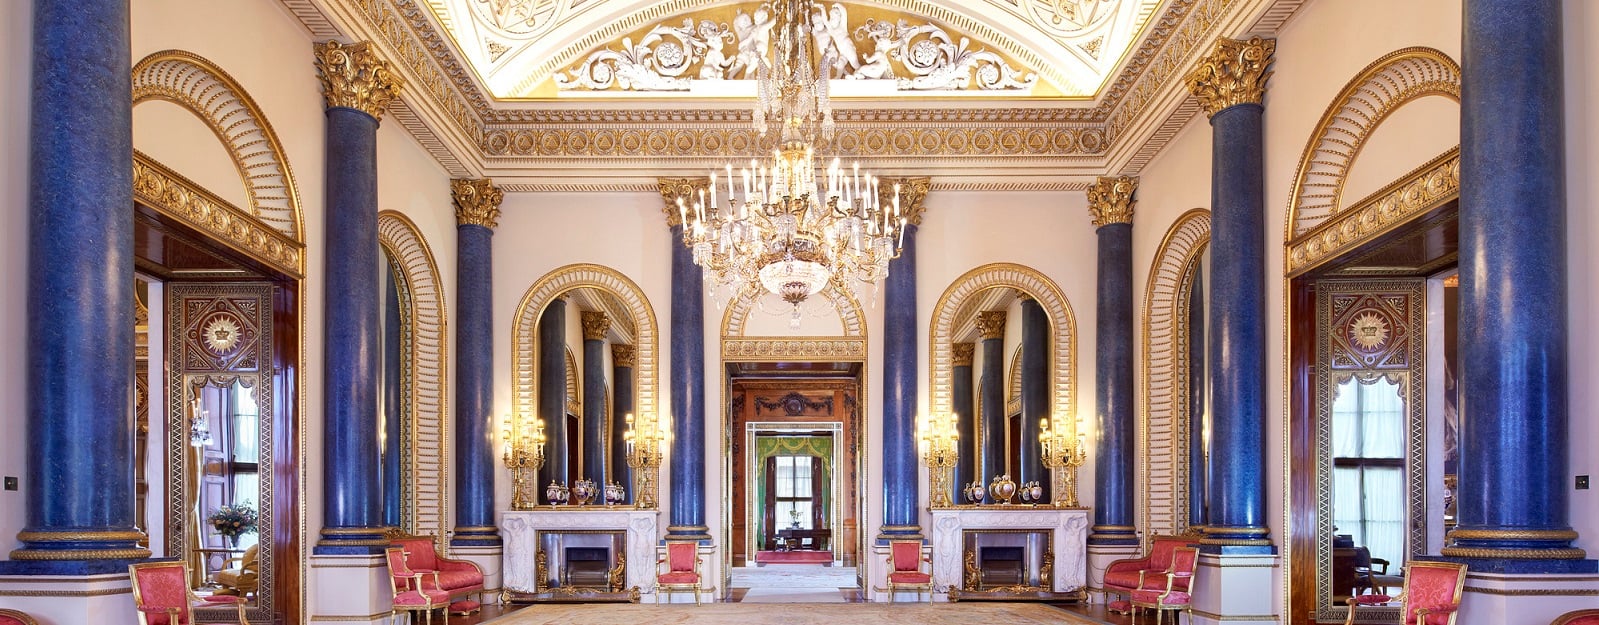 The Music Room at Buckingham Palace